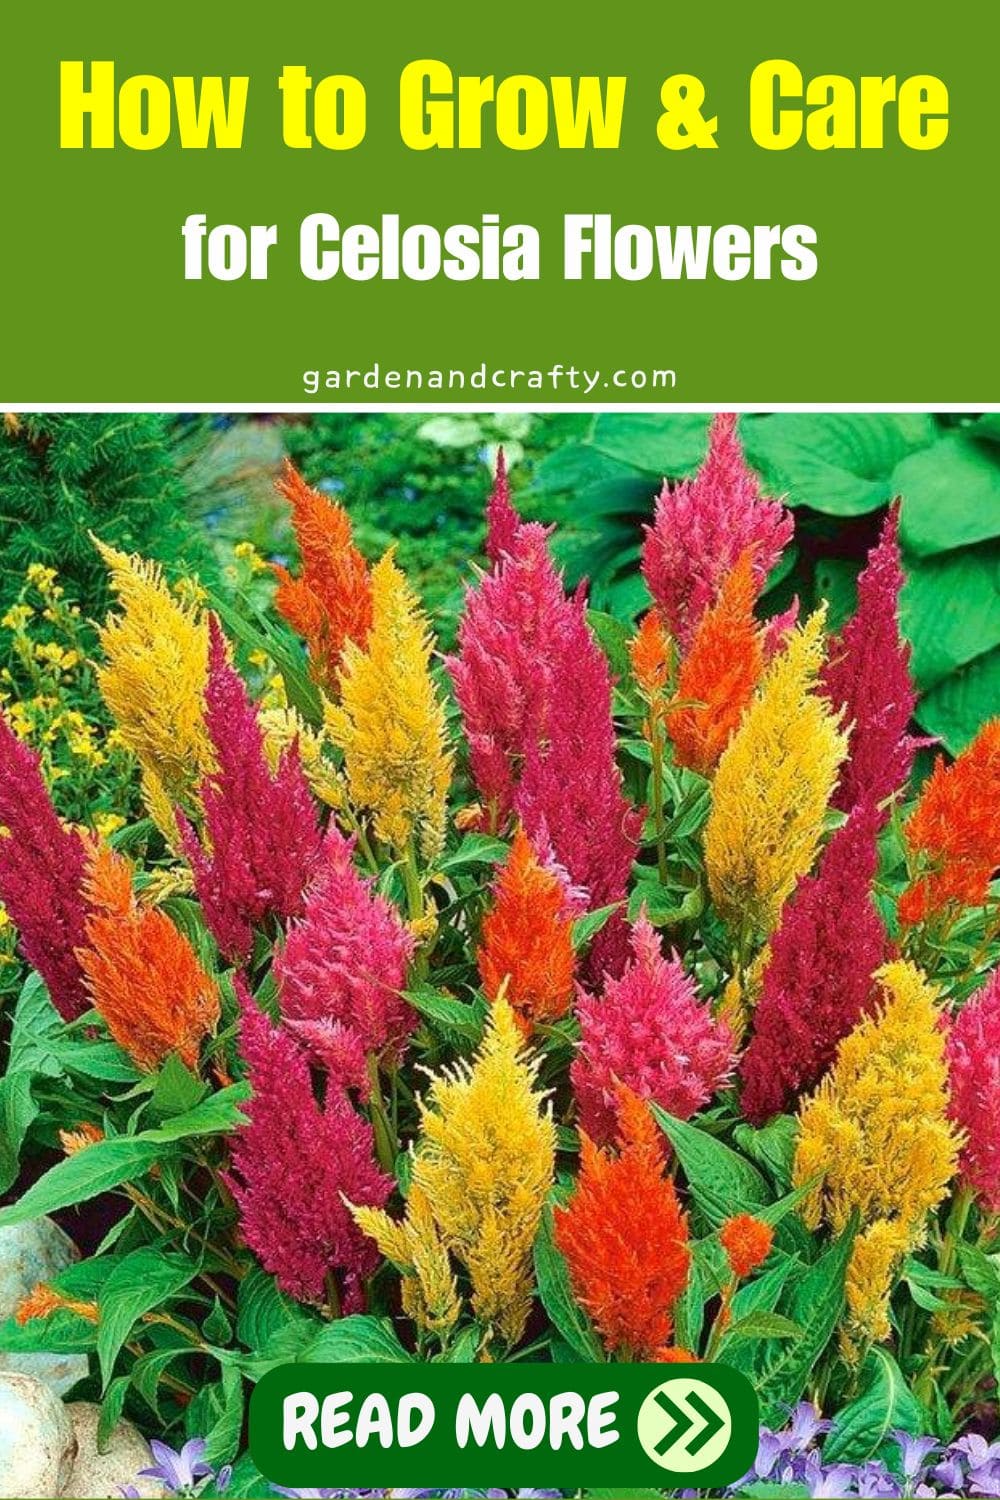 How to Grow and Care for Celosia Flowers